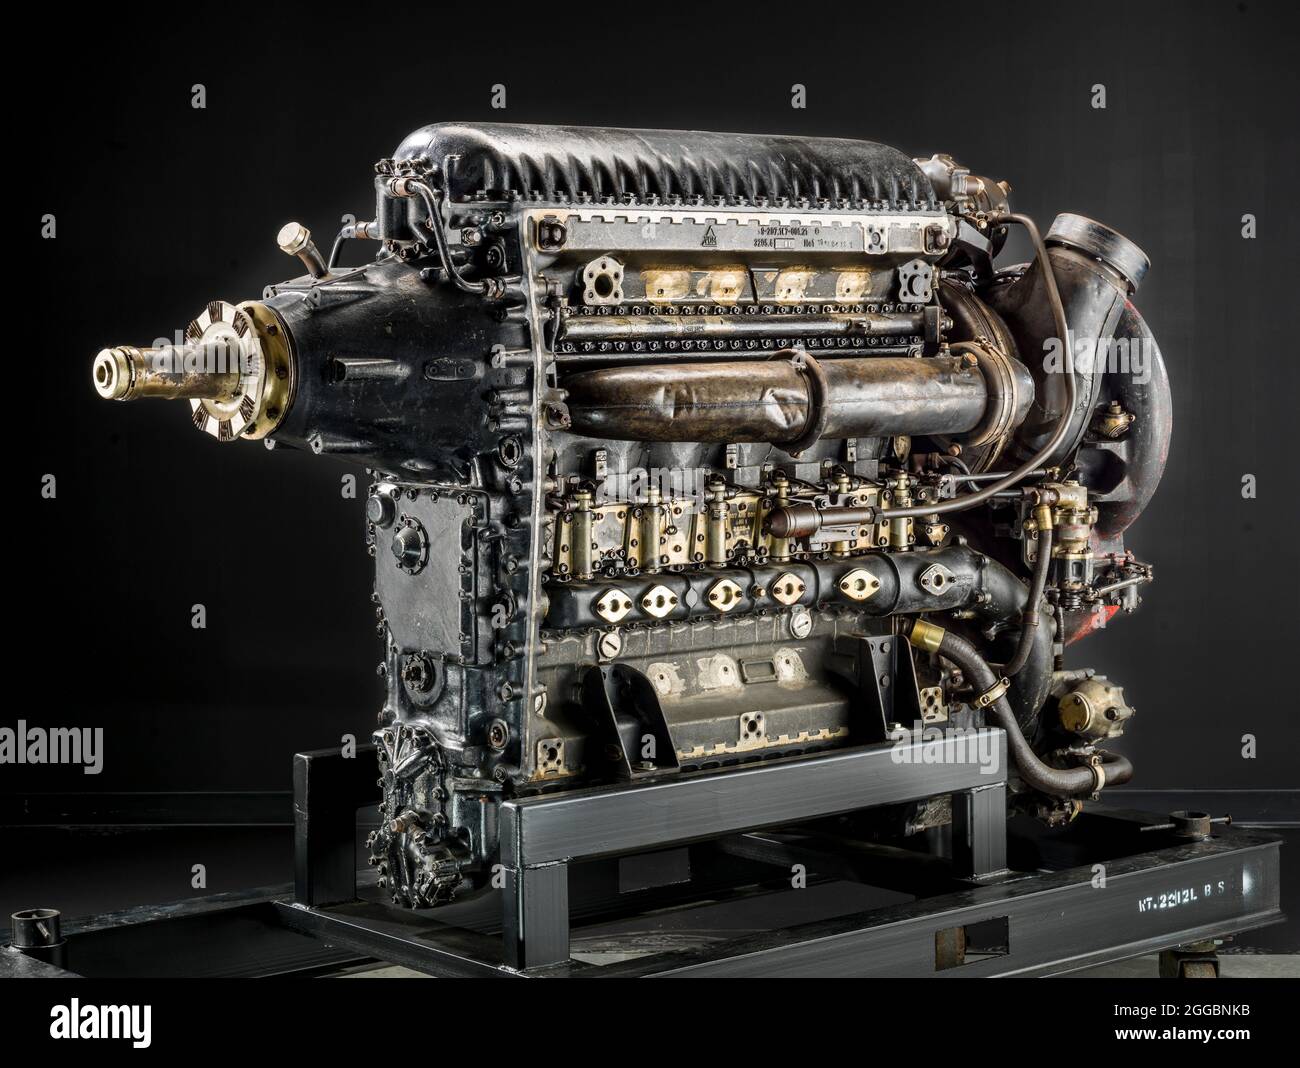 Dr. Hugo Junkers started development of his Diesel aircraft engines in a small factory at Dessau, Germany in 1911. His early engines functioned on the two-stroke cycle principle with piston-controlled parts, as did his later Junkers Jumo Diesels. Among the advantages of later, refined Diesel aircraft engines were lower specific fuel consumption (for long-range applications), lower exhaust gas temperature (for exhaust-driven supercharger installations), and reduced fire hazard as compared to conventional reciprocating aircraft engines. The Jumo 207 was a Jumo 205 with a turbo-supercharger. A Di Stock Photo